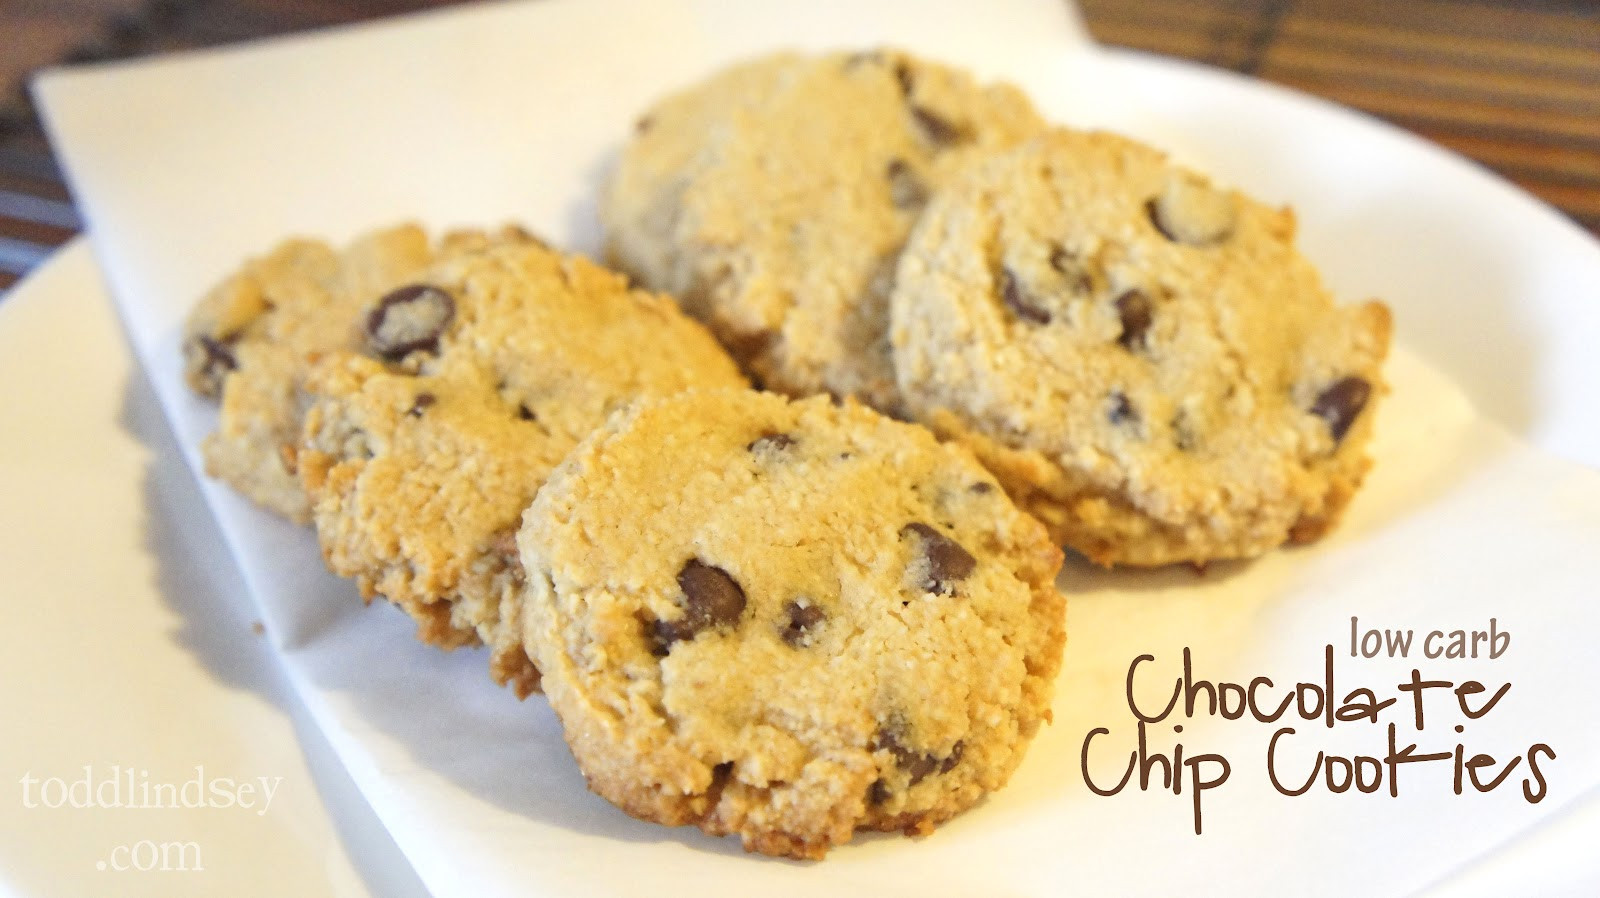 Low Carb Coconut Flour Chocolate Chip Cookies
 Domer Home Chocolate Chip Cookies Low Carb